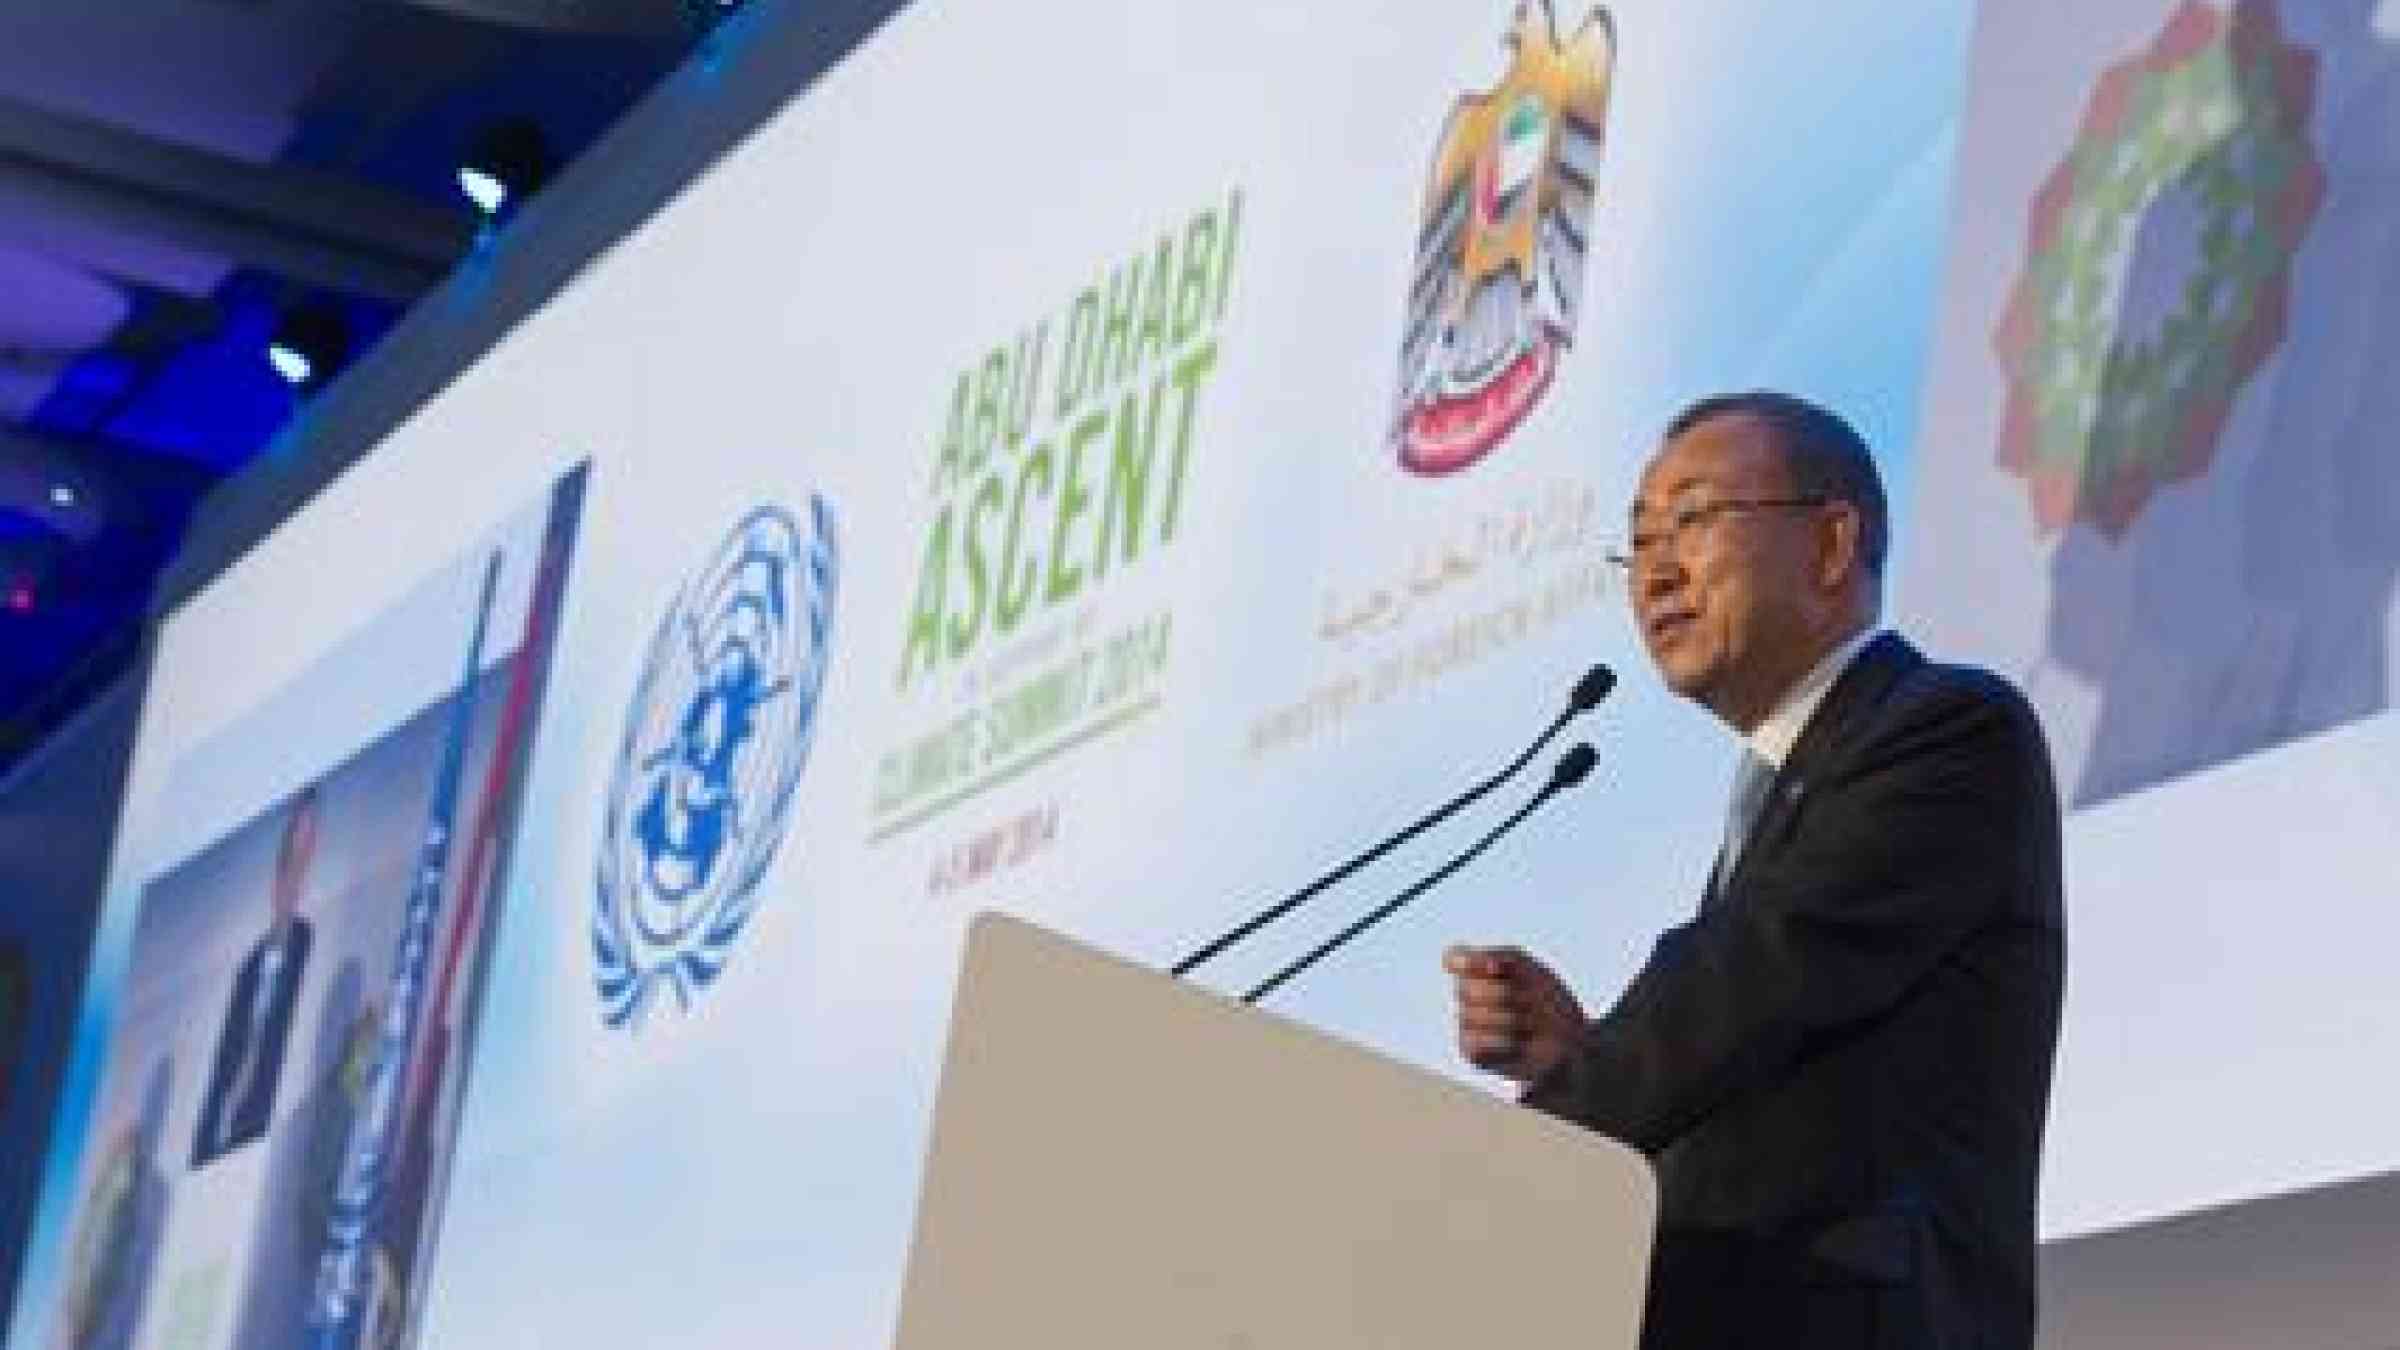 UN Secretary-General Ban Ki-moon addresses opening ceremony of the Abu Dhabi Ascent climate change conference, 04 May 2014, United Arab Emirates. UN Photo/E. Debebe